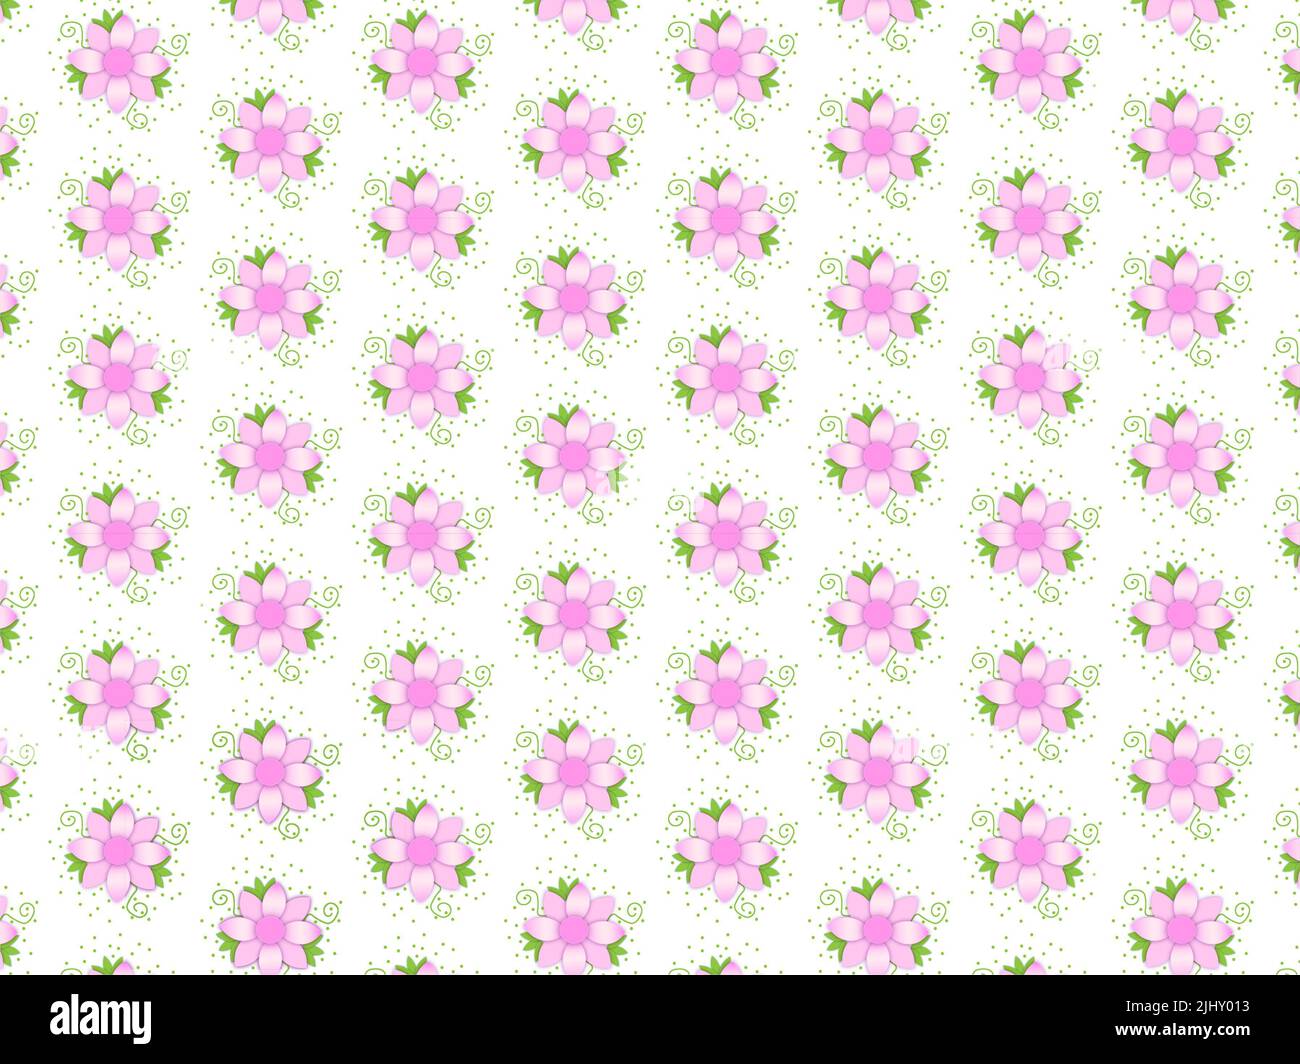 Dainty and Sweet with pink flowers are these two matching backgrounds isolated on white background Stock Photo